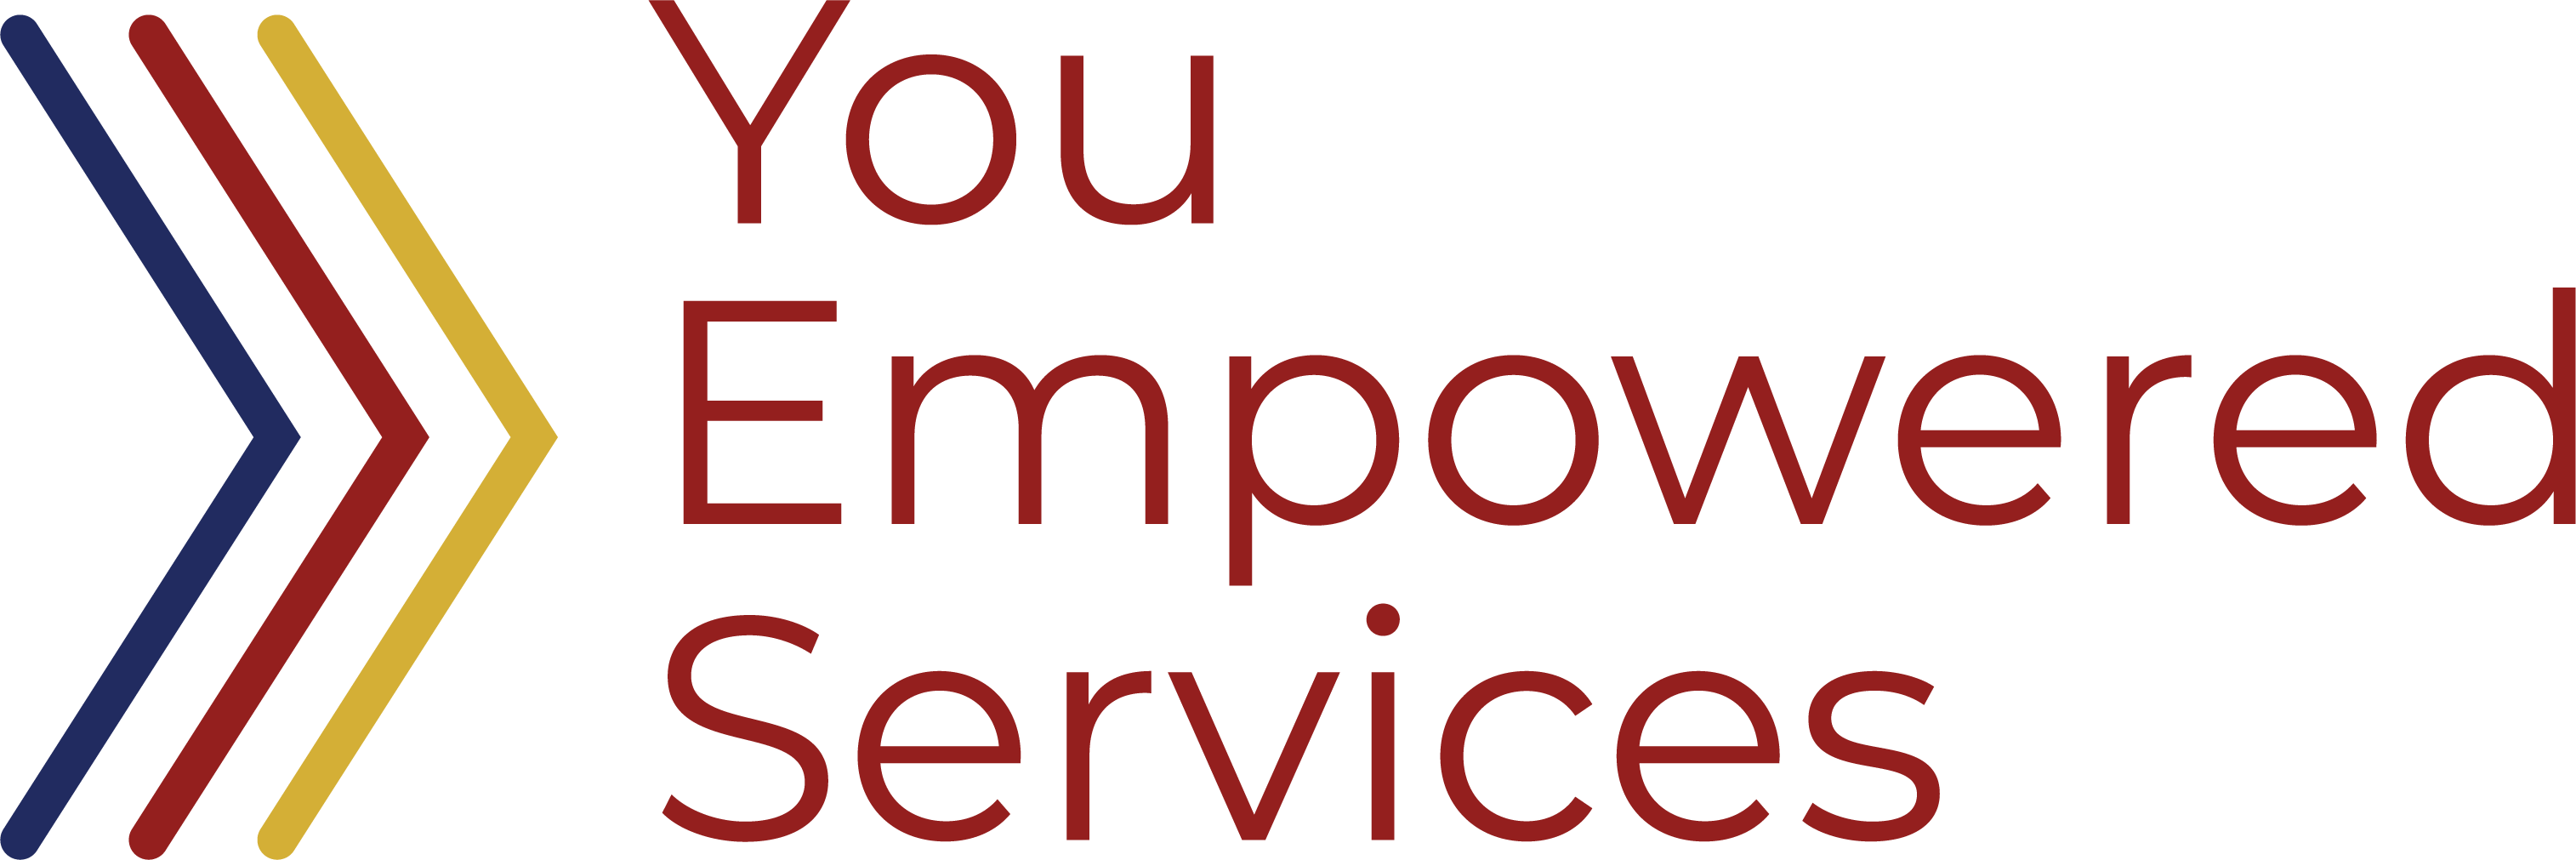 You Empowered Services